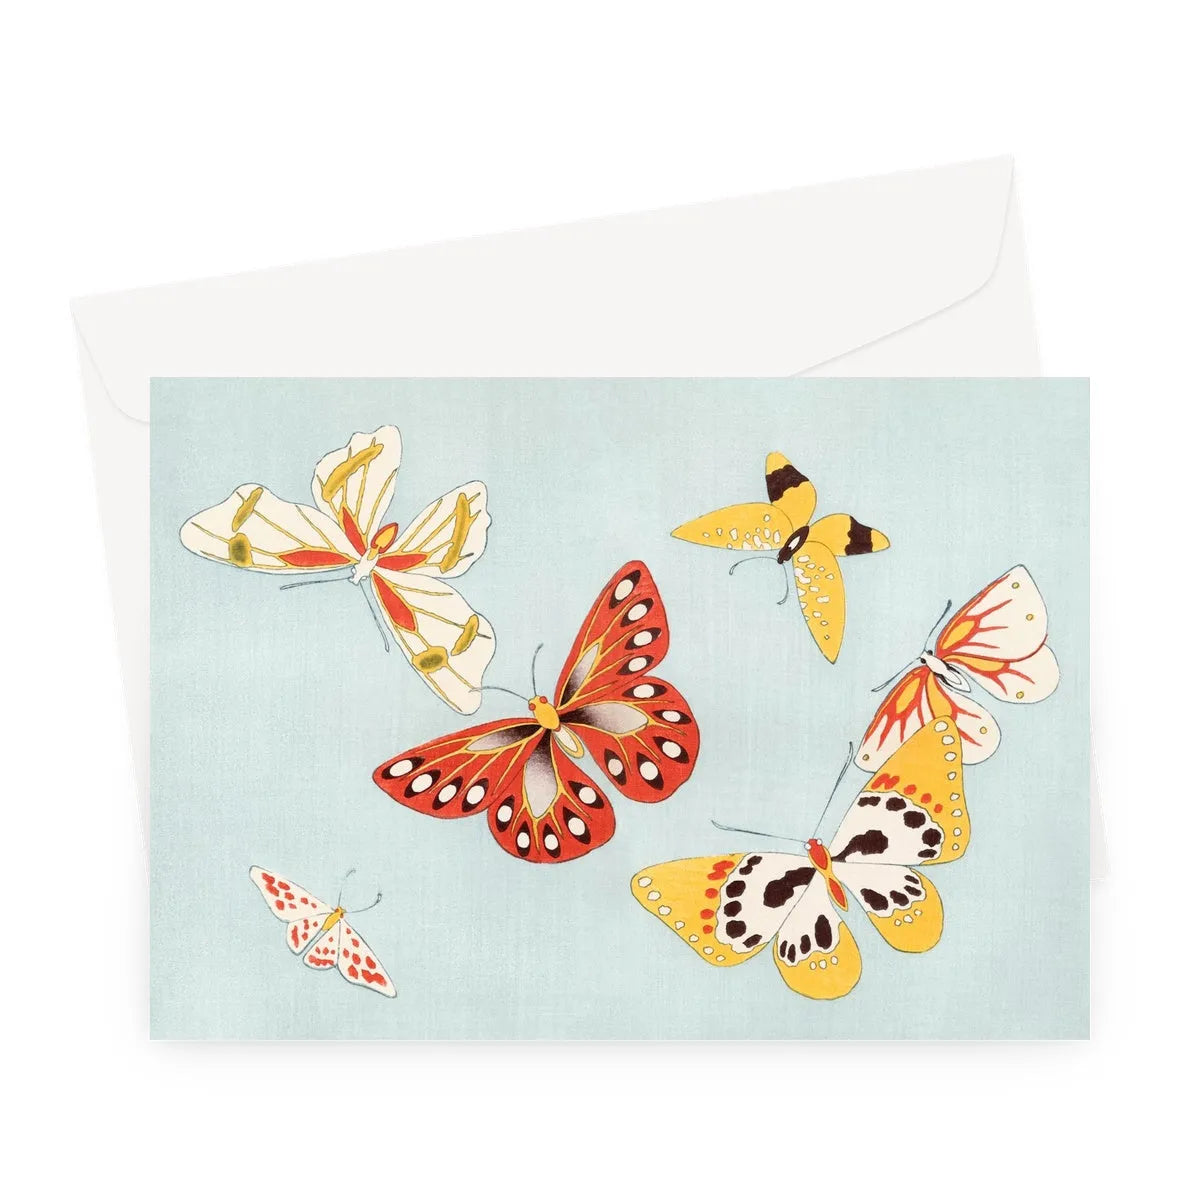 Japanese Summer Colors Butterflies By Kamisaka Sekka Greeting Card - A5 Landscape / 1 Card - Greeting & Note Cards